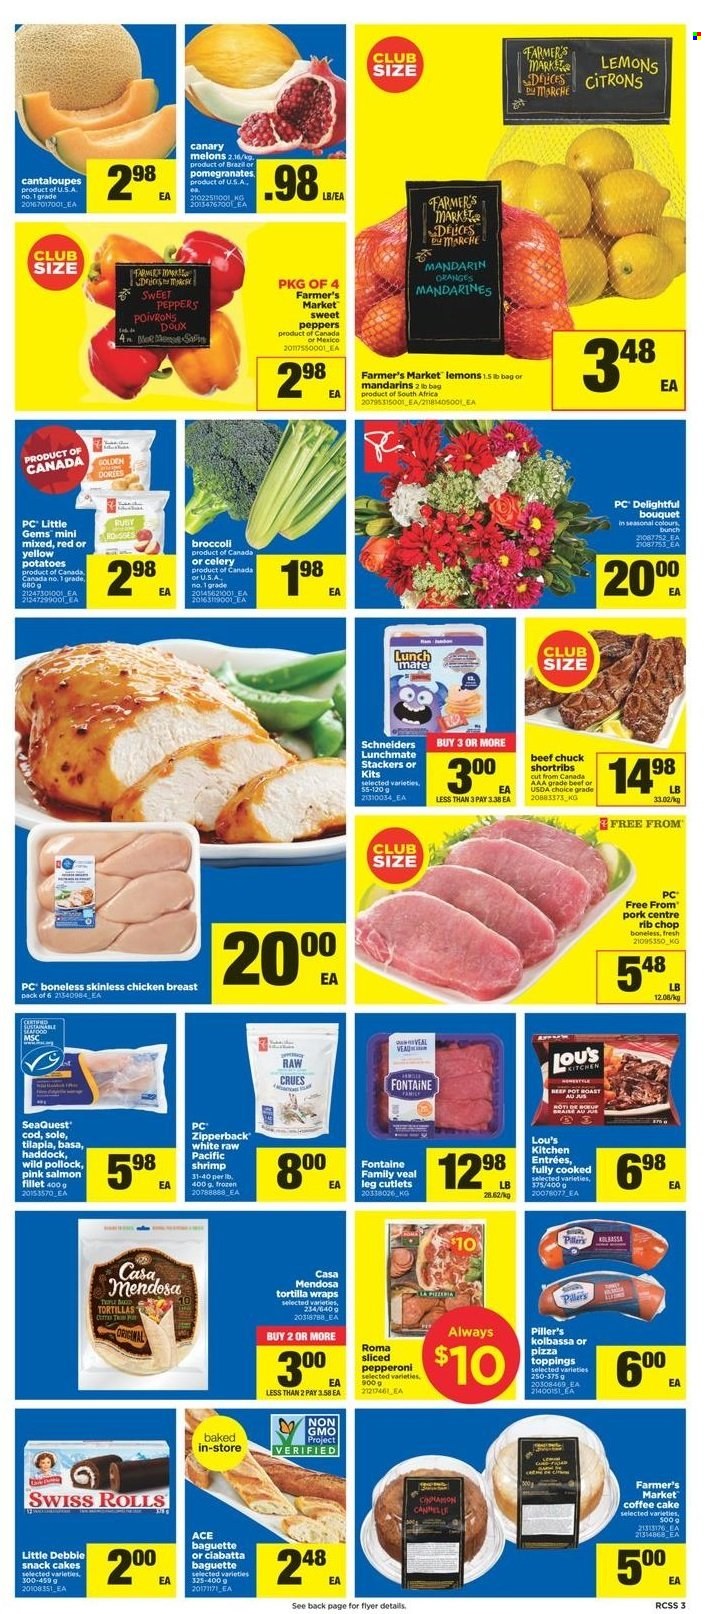 thumbnail - Real Canadian Superstore Flyer - October 28, 2021 - November 03, 2021 - Sales products - tortillas, cake, Ace, wraps, coffee cake, broccoli, cantaloupe, sweet peppers, potatoes, peppers, mandarines, melons, pomegranate, lemons, cod, salmon, salmon fillet, haddock, pollock, seafood, shrimps, pizza, pepperoni, snack, chicken breasts, chicken, rib chops, pot, bouquet, baguette, ciabatta, oranges. Page 3.